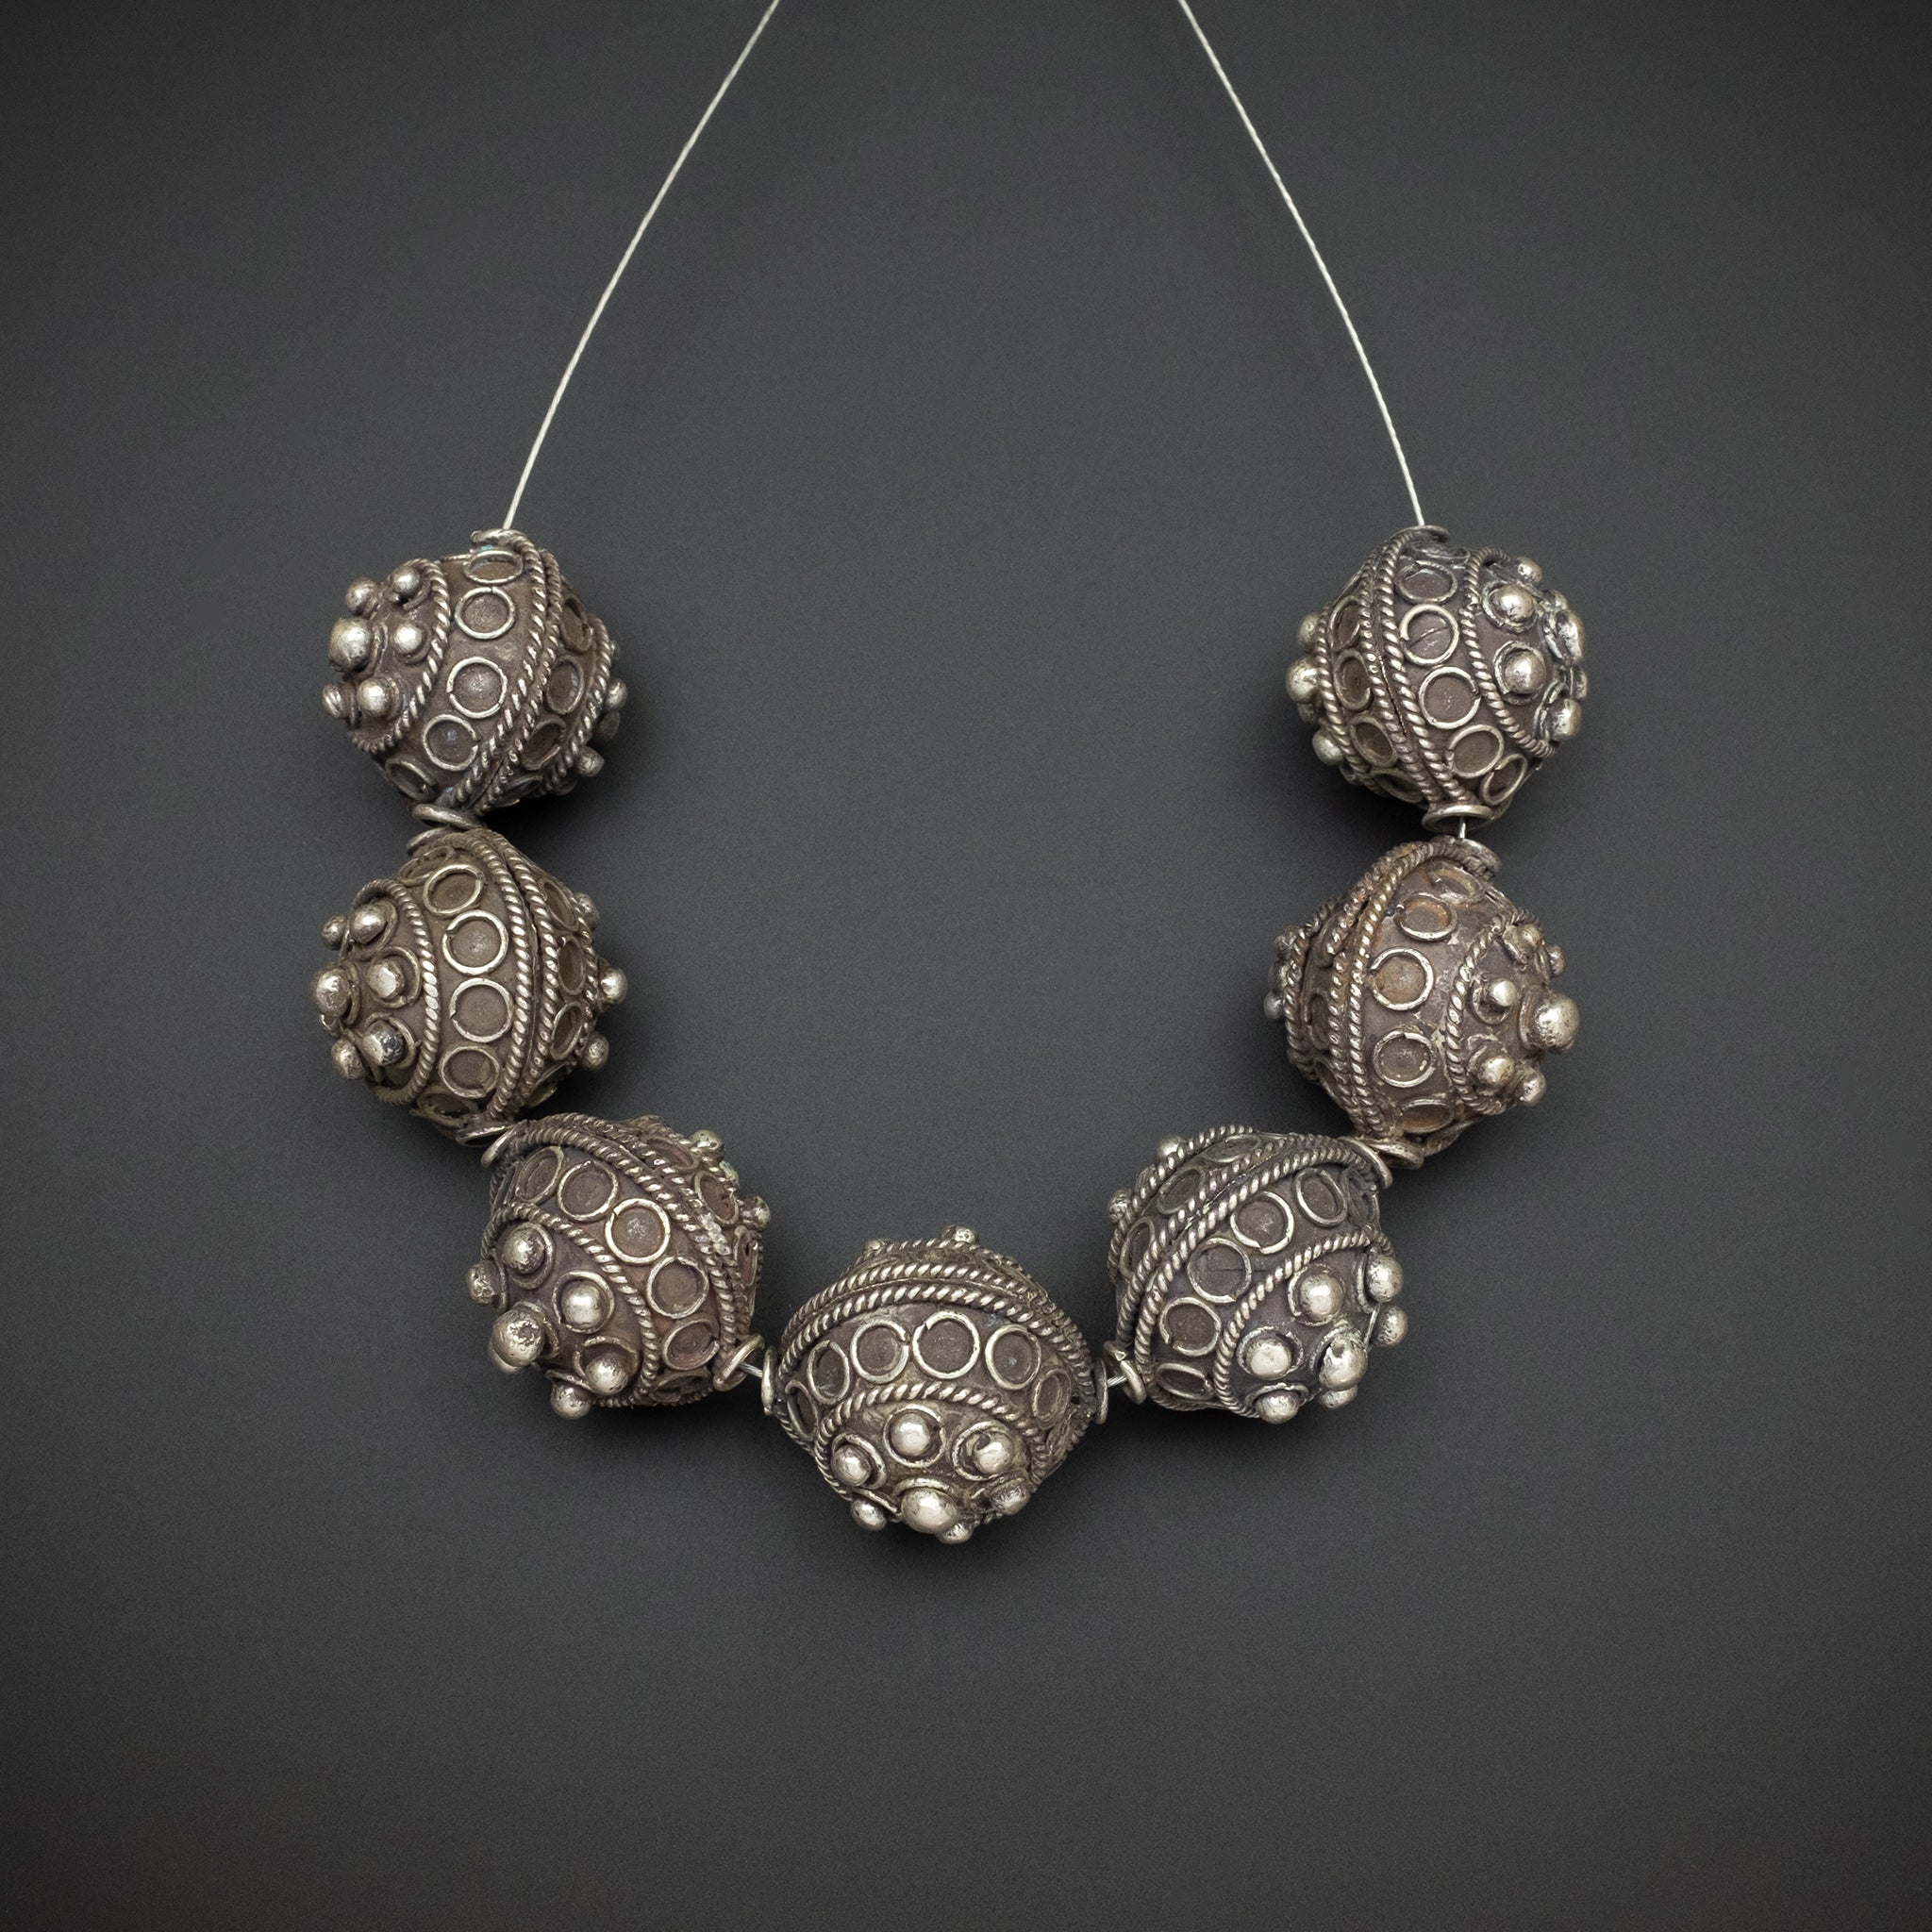 Silver Moroccan beads